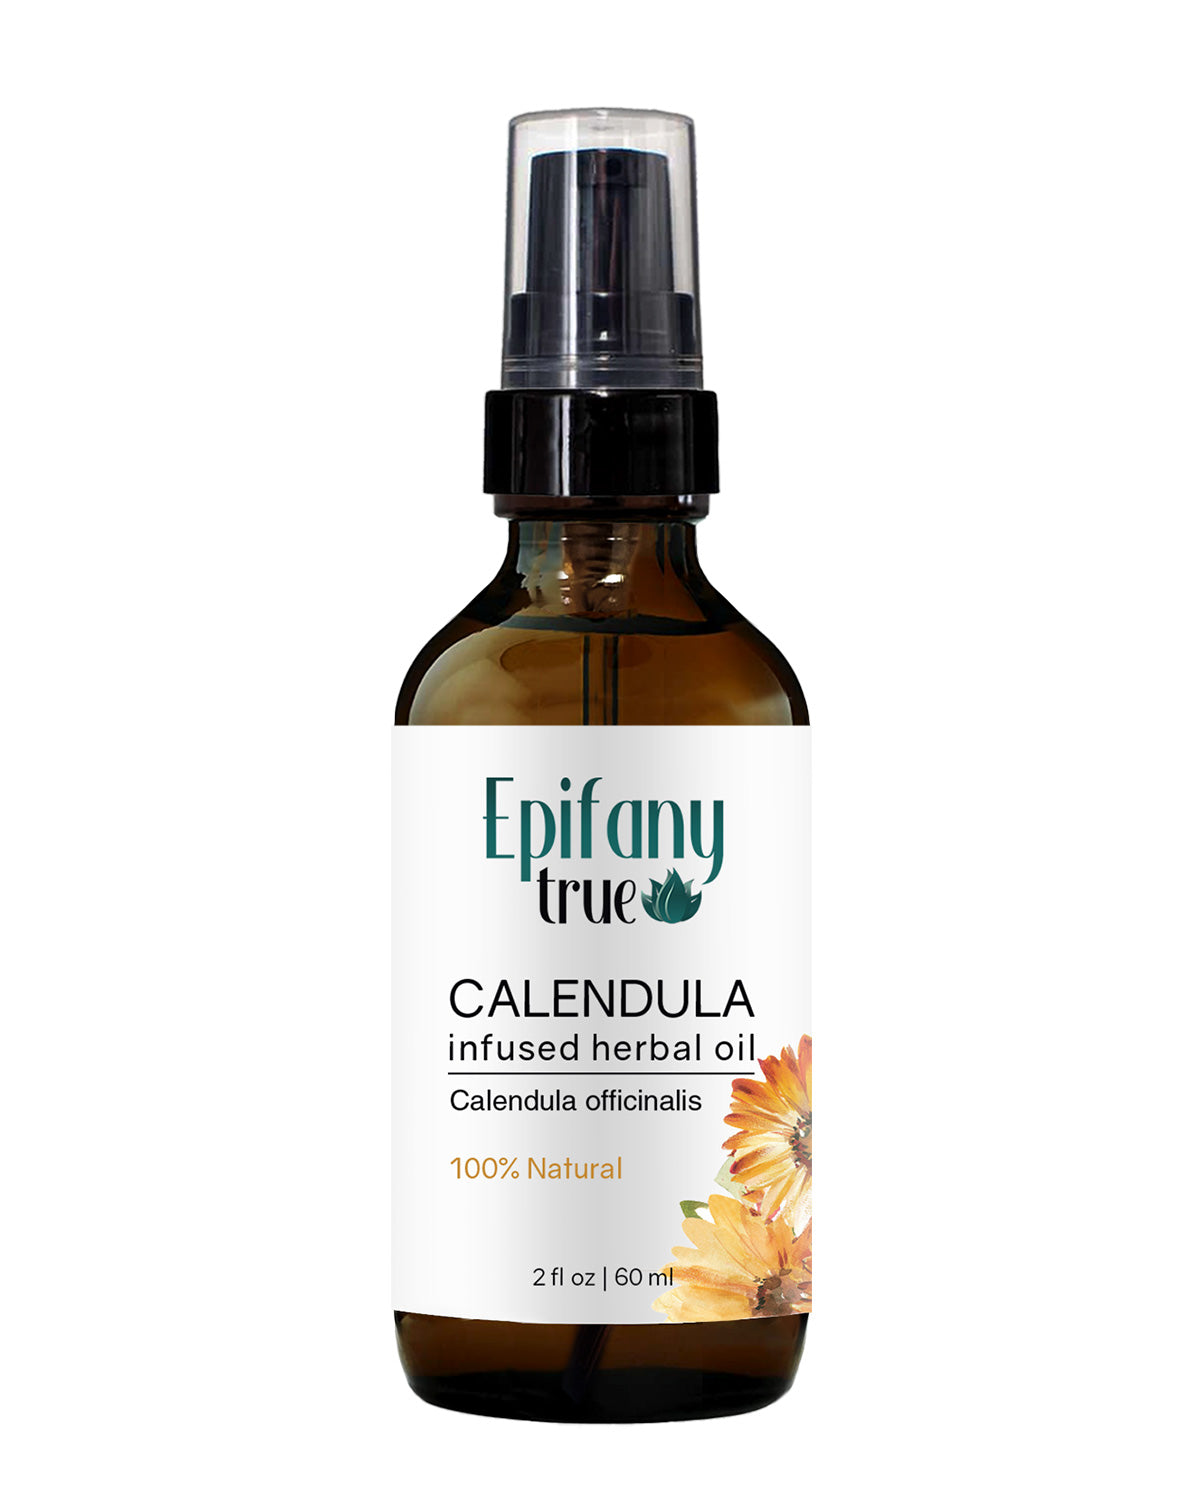 Epifany True 100% Natual Calendula Oil 2oz infused whole flowers in organic sunflower seed oil